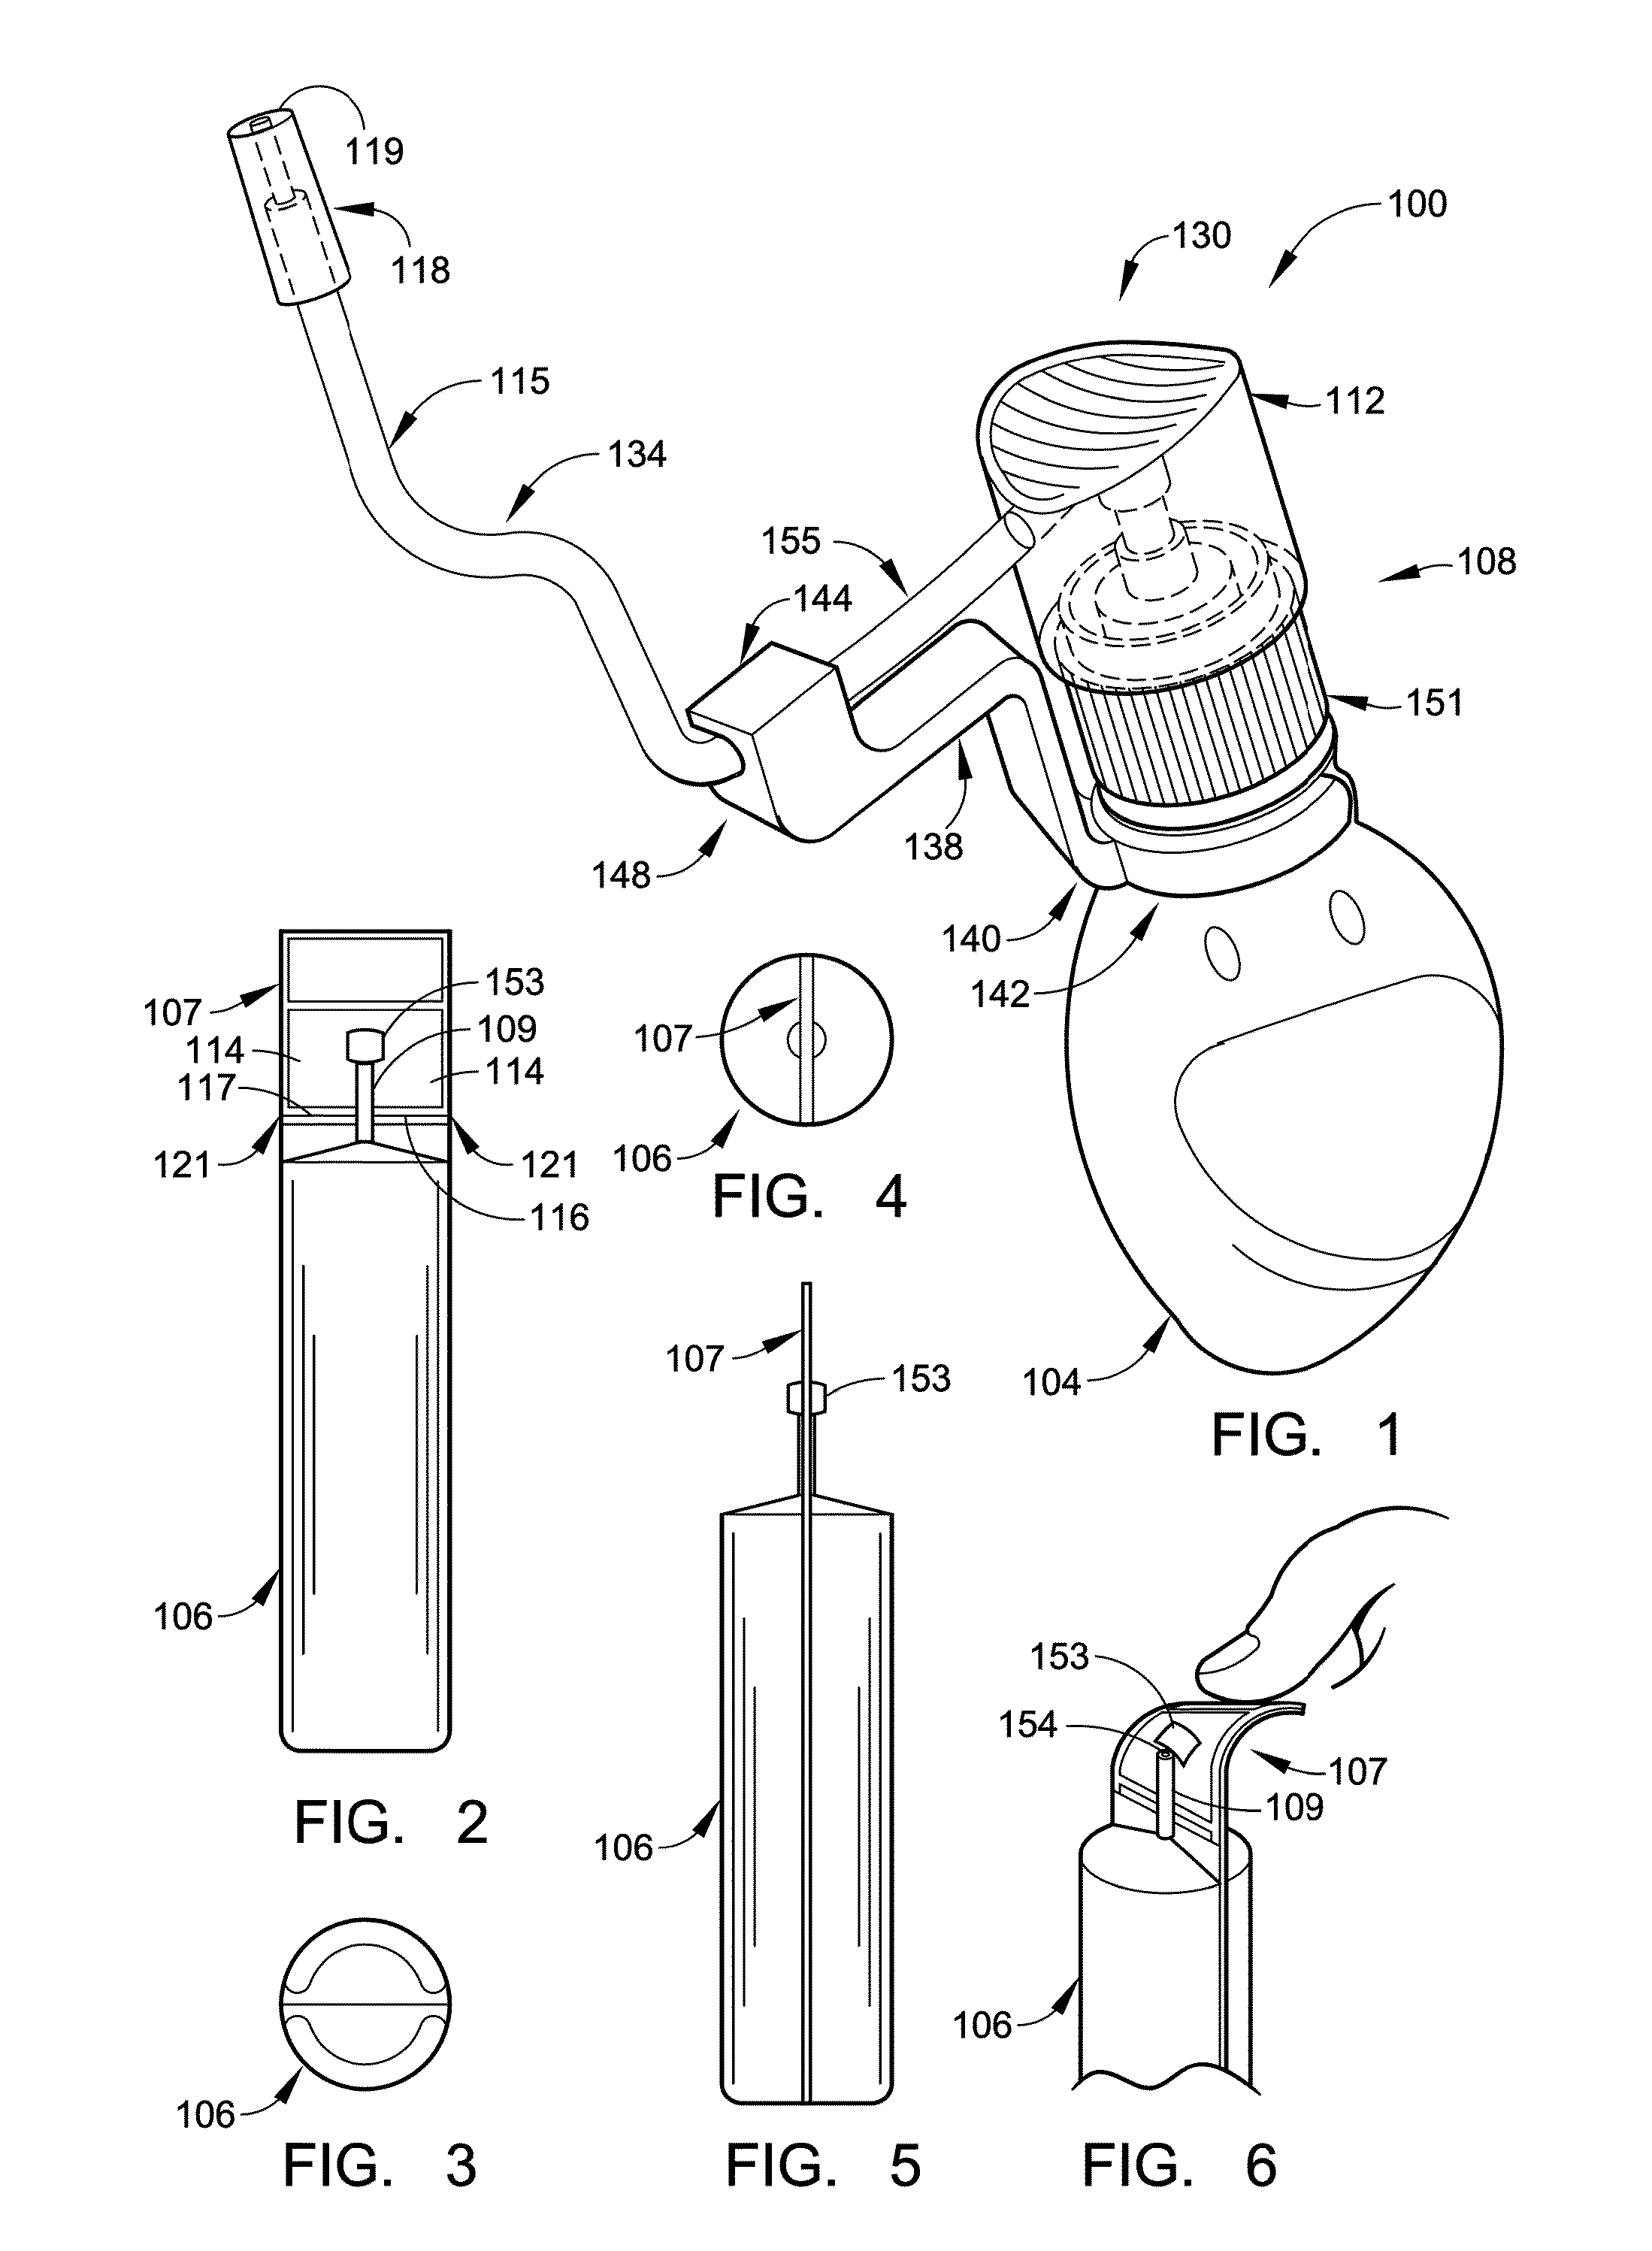 Device and Method for Washing Nasal Passages of Children